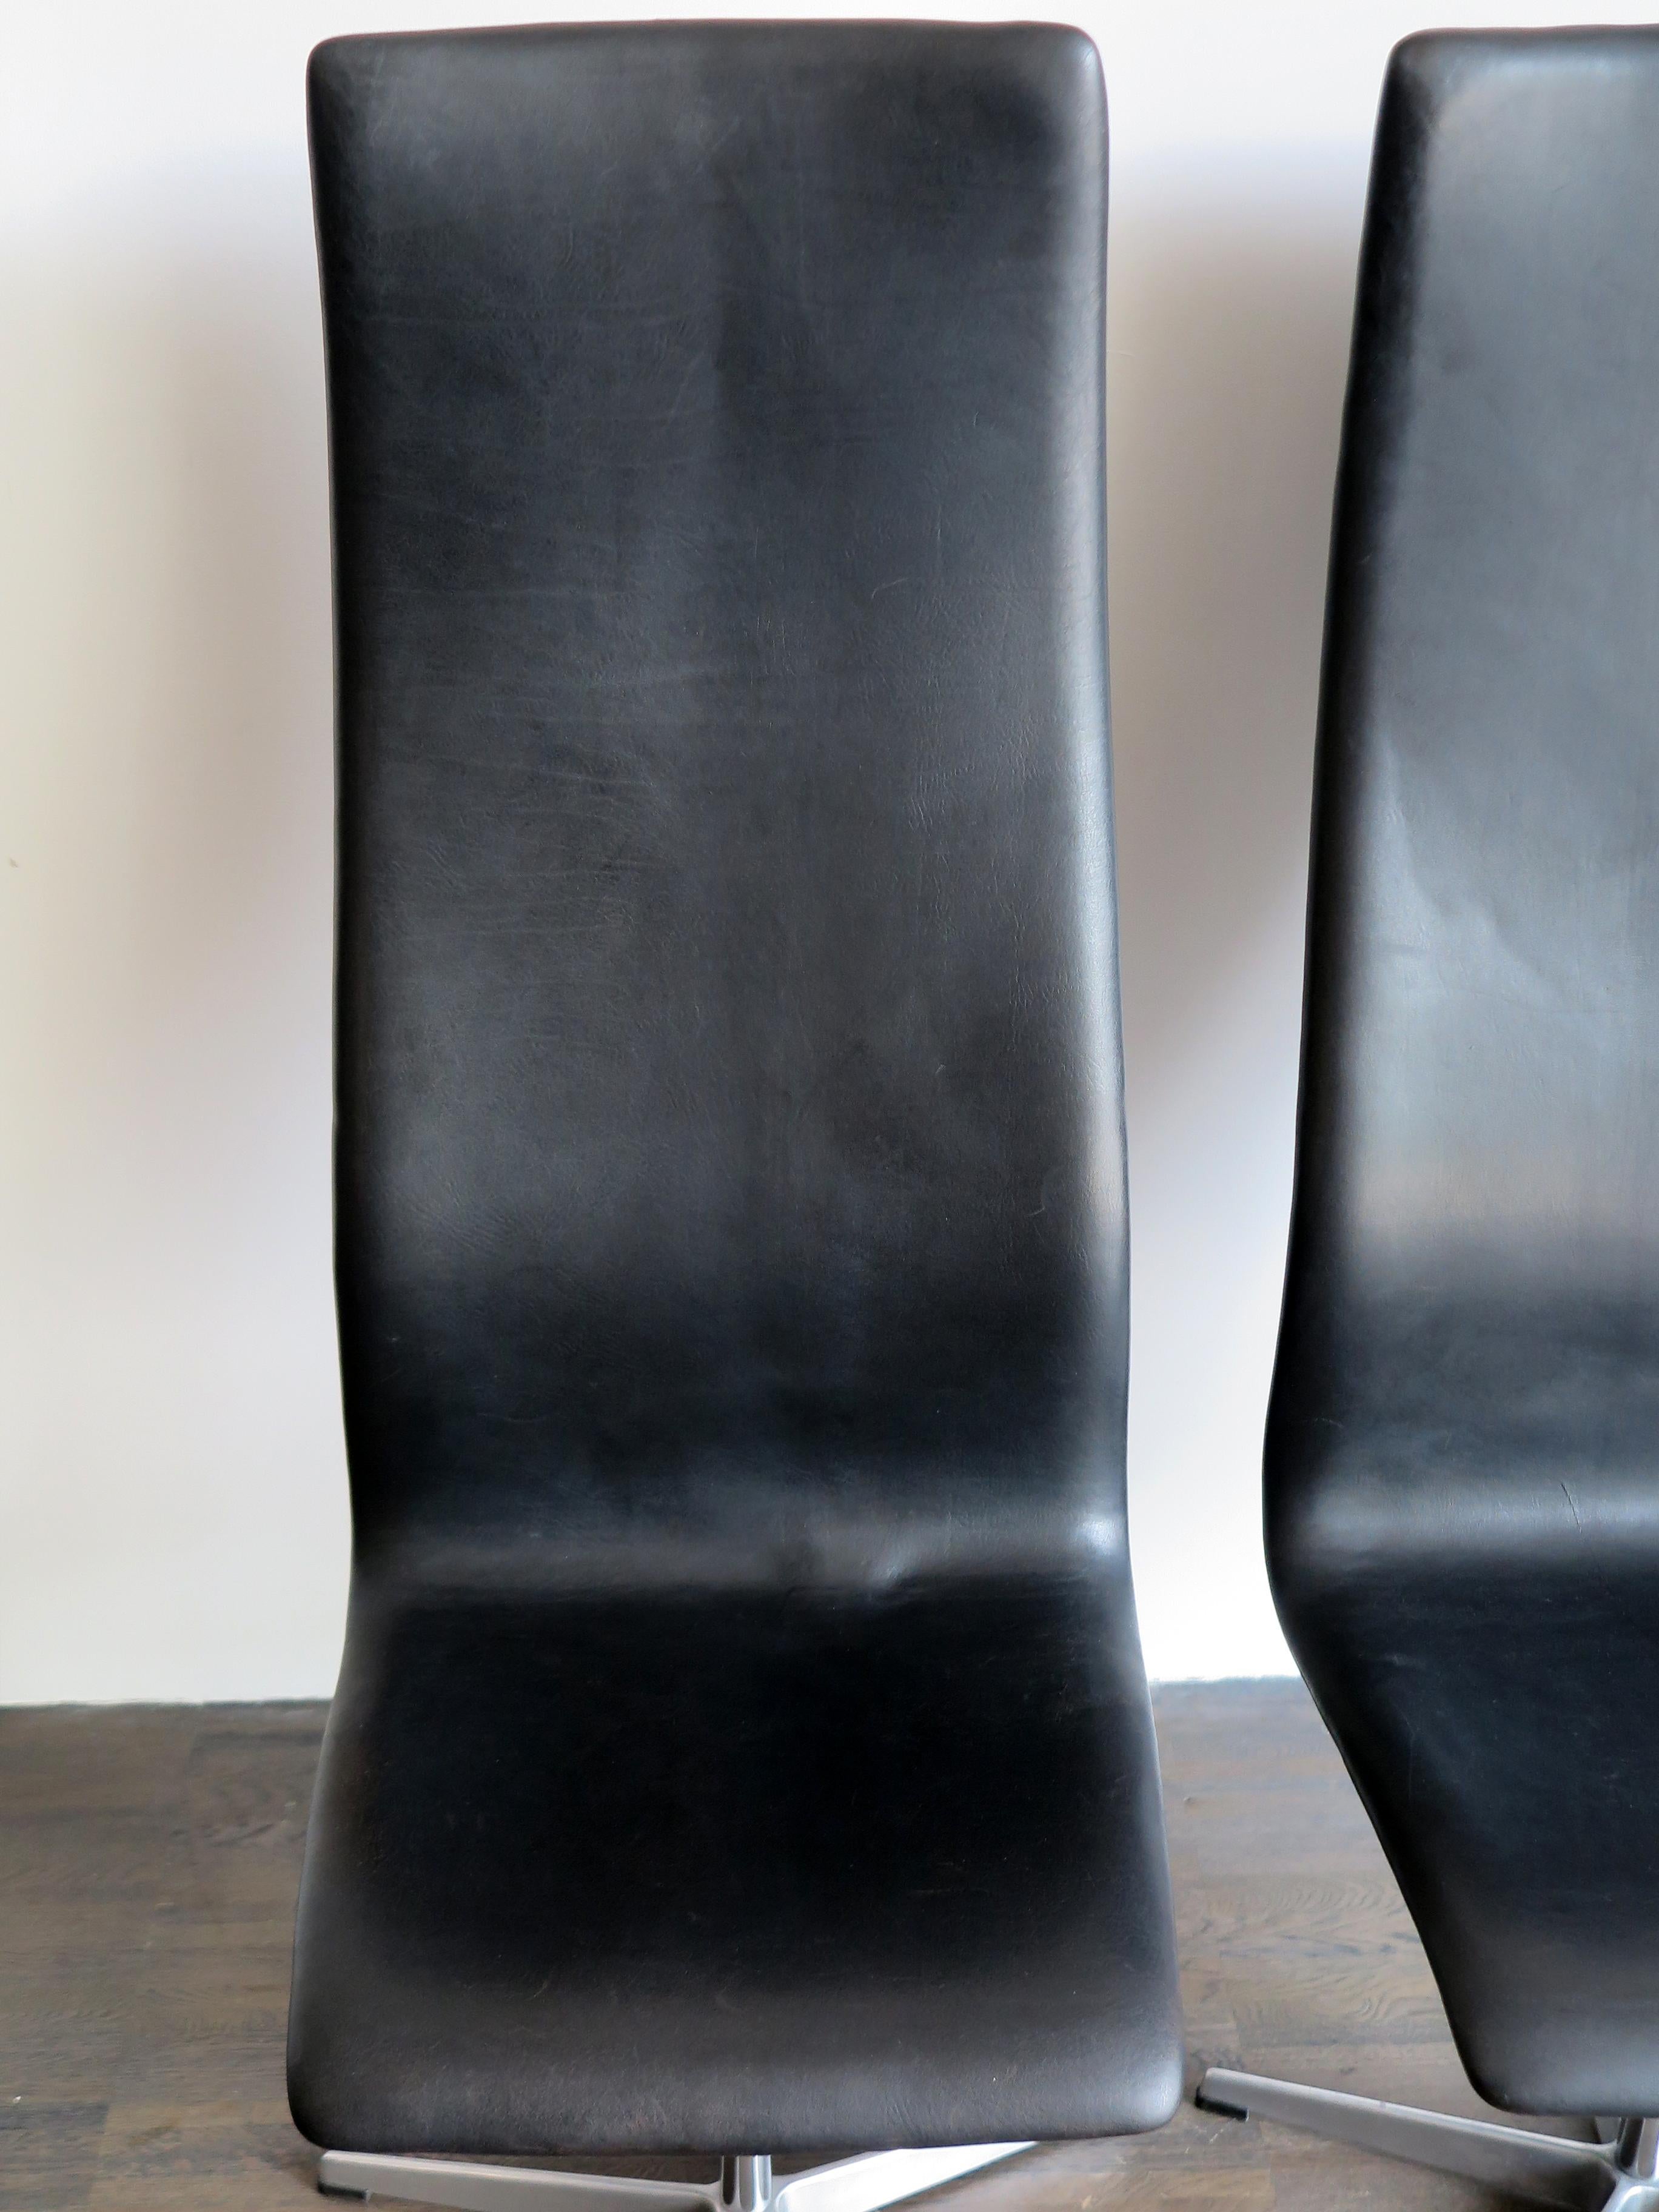 Metal Oxford Midcentury Black Leather Chairs by Arne Jacobsen for Fritz Hansen, 1960s For Sale